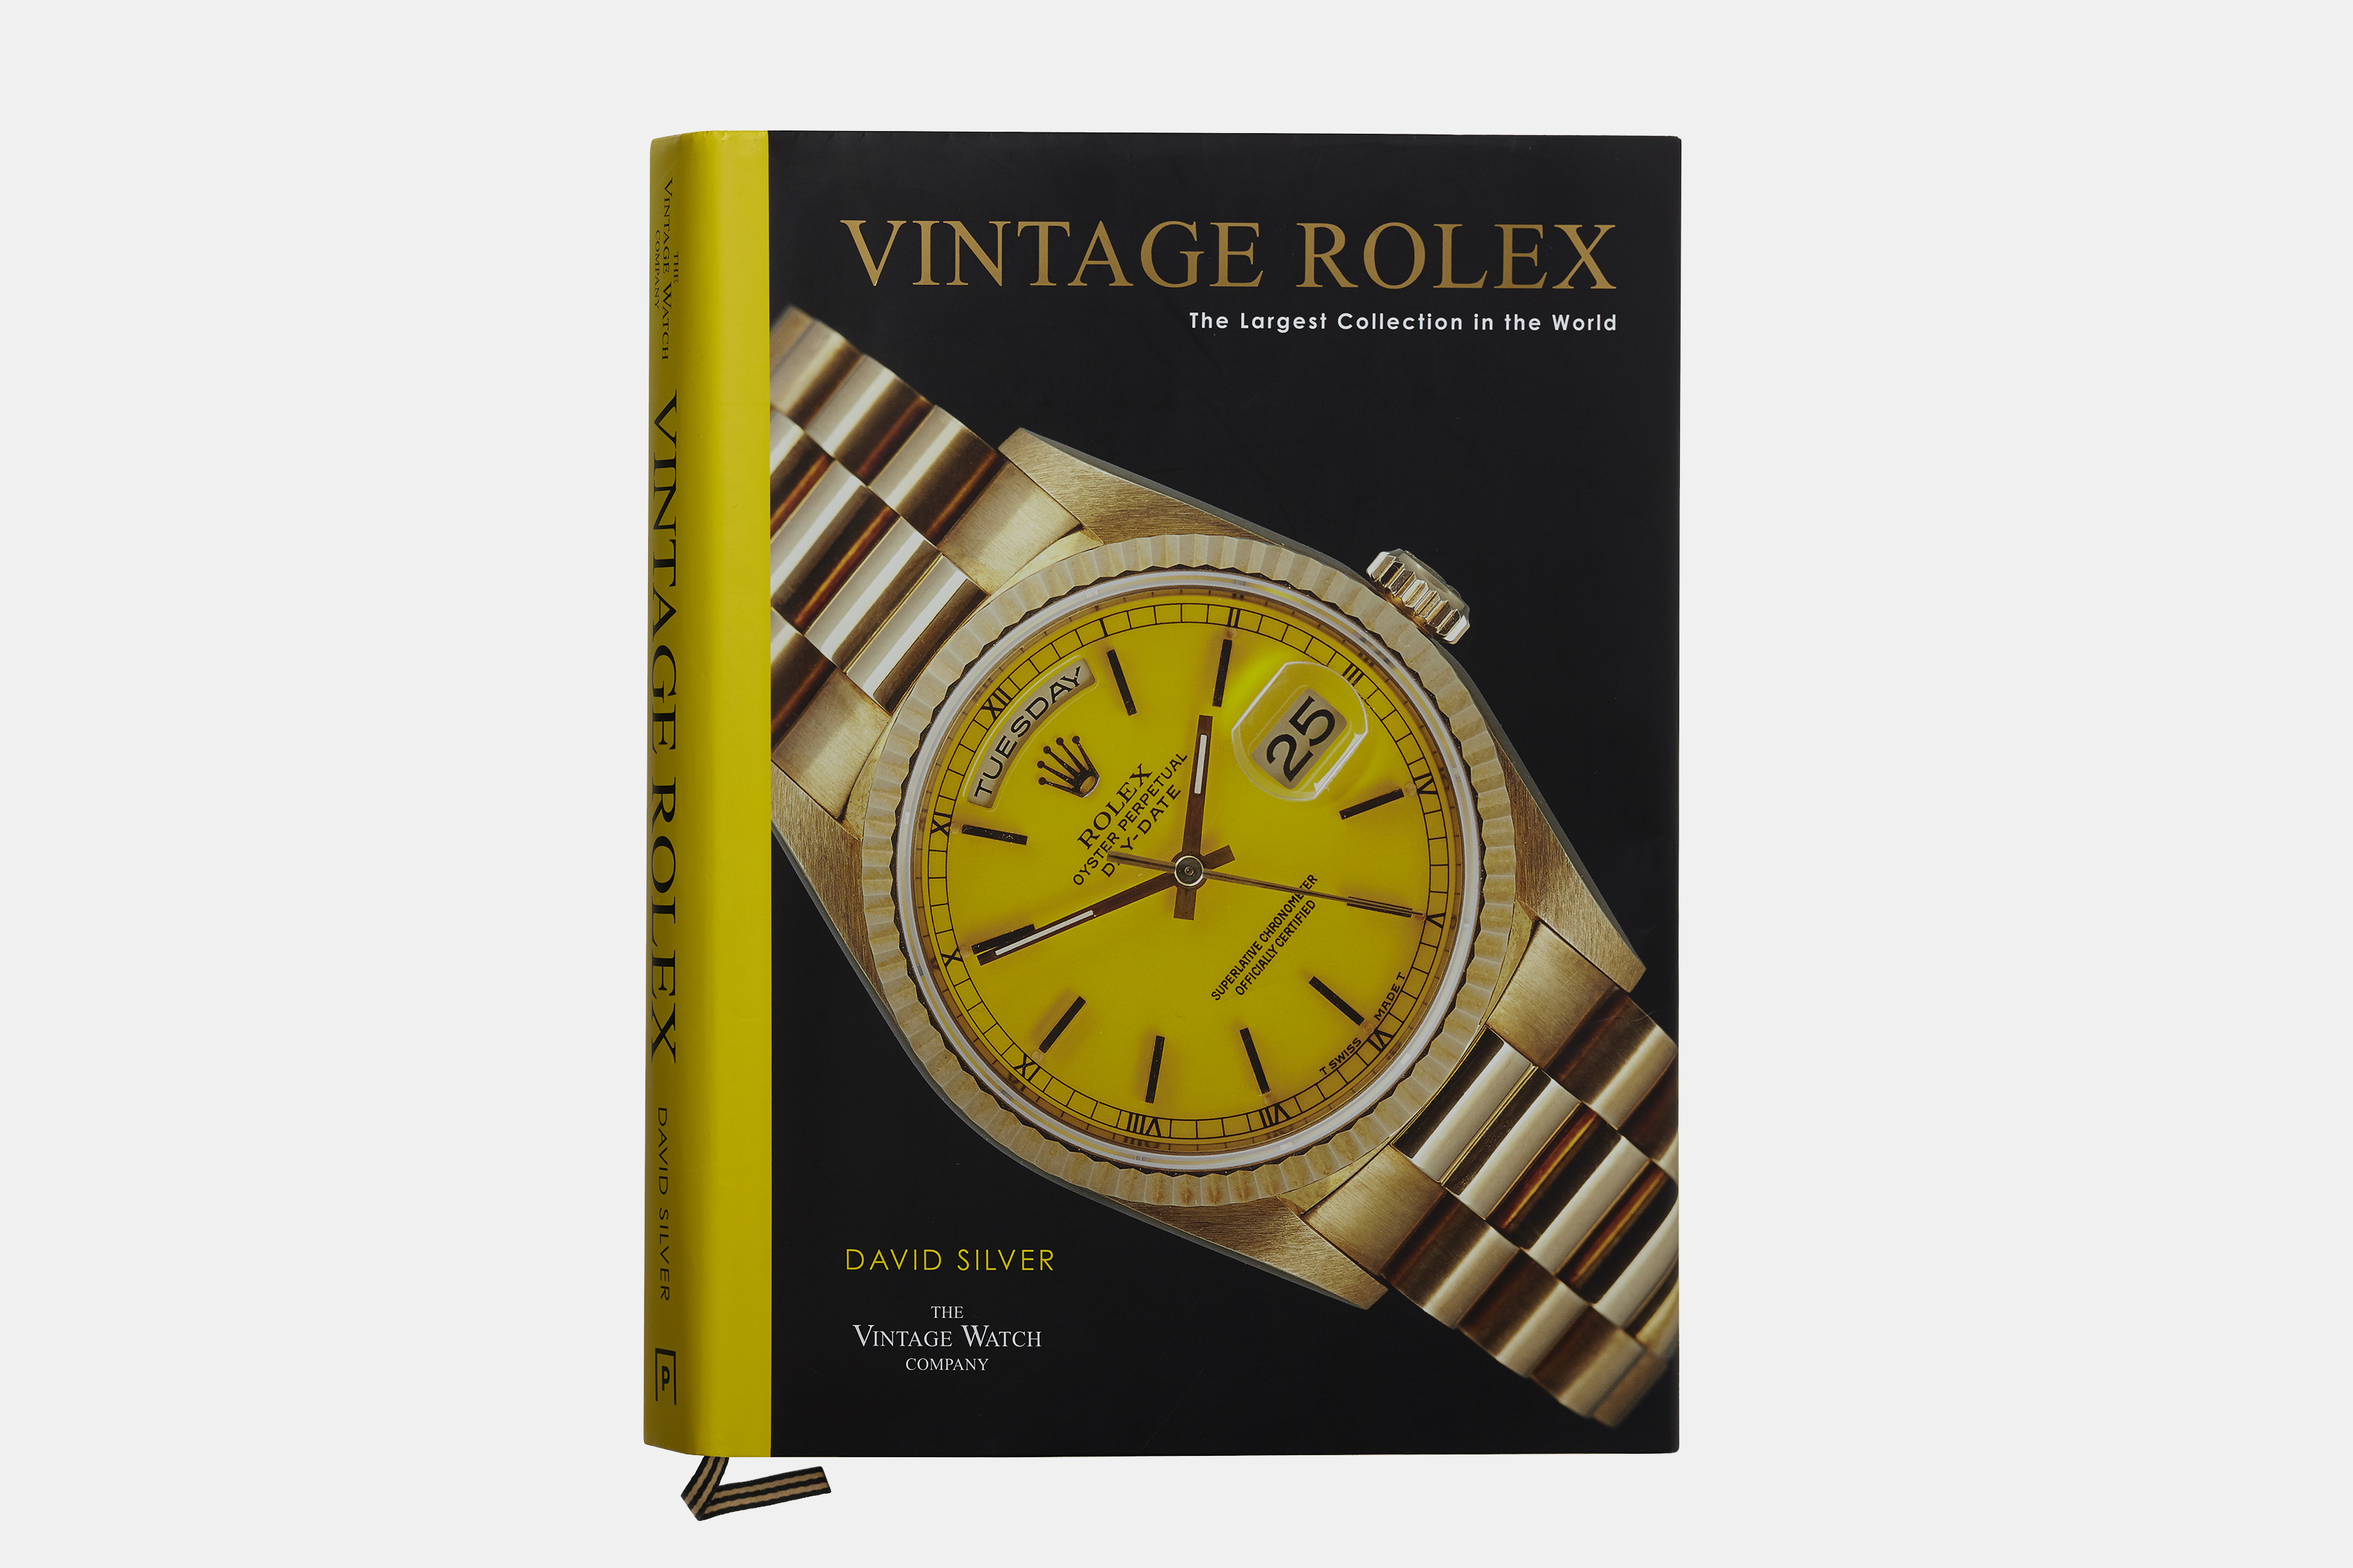 the cover of the book "Vintage Rolex: The Largest Collection in the World"